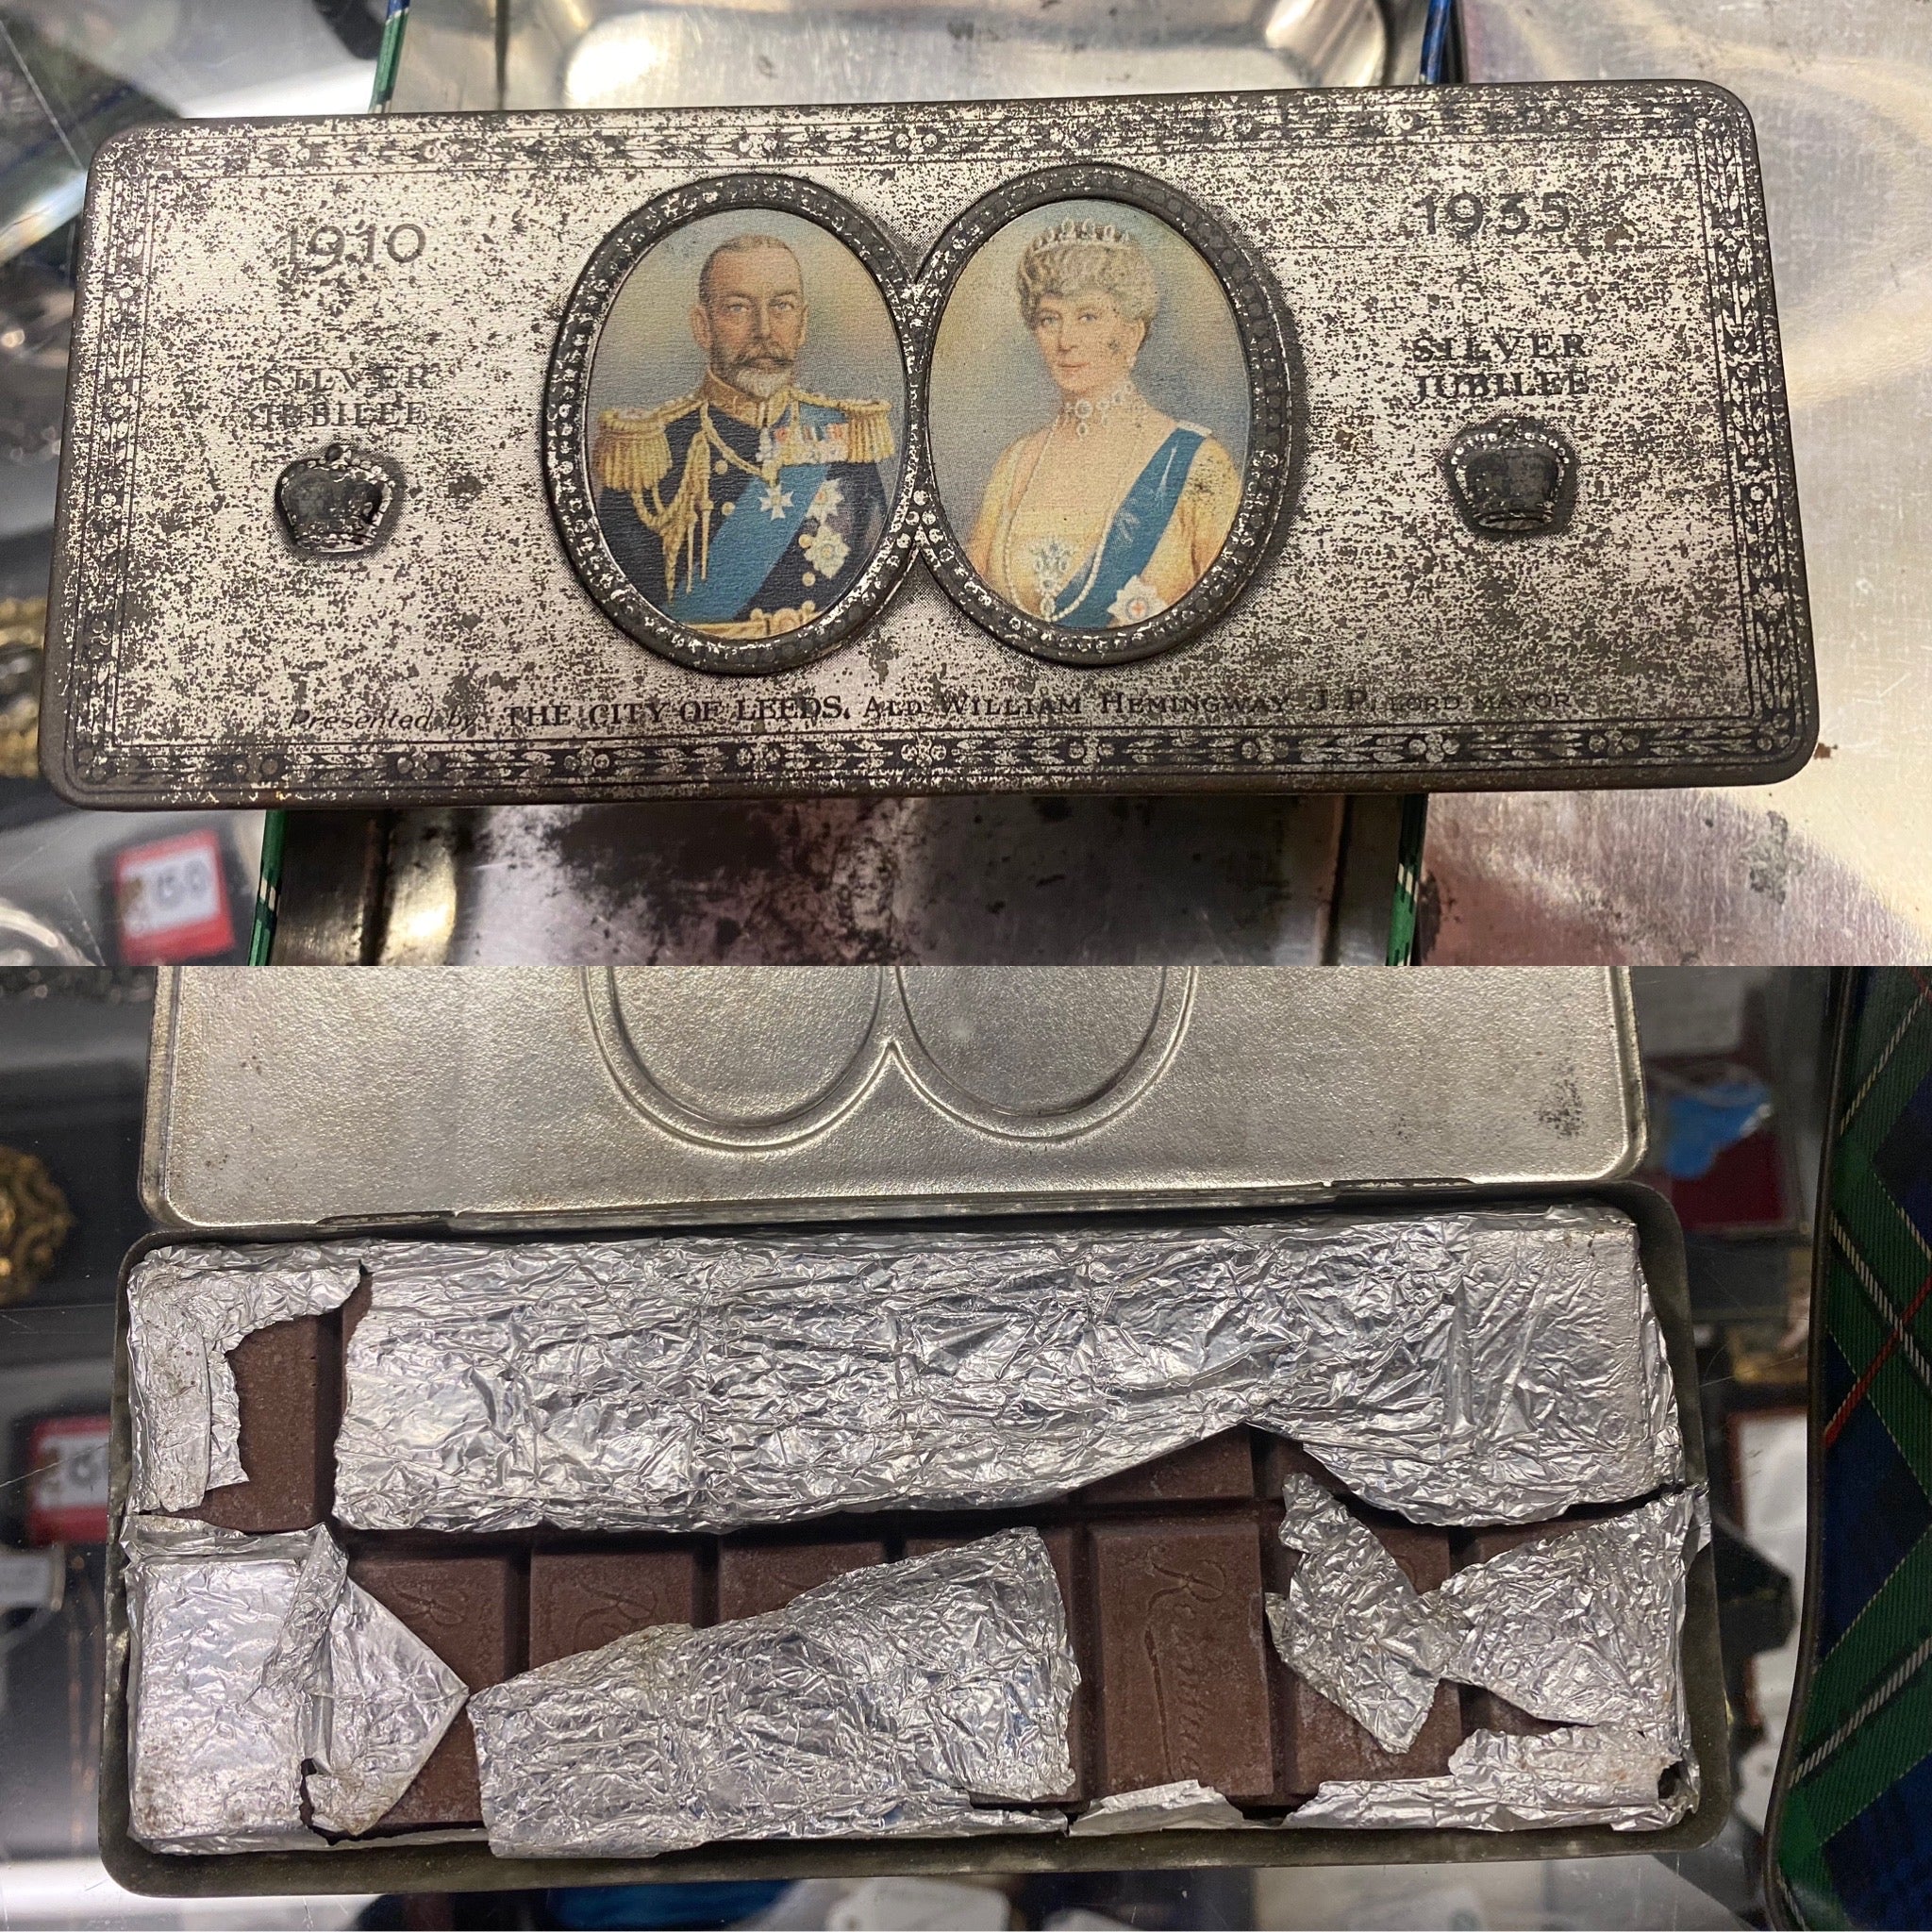 Rare Untouched Rowntree’s Silver Jubilee Chocolate Bar In Original Tin From 1935 - Source Vintage